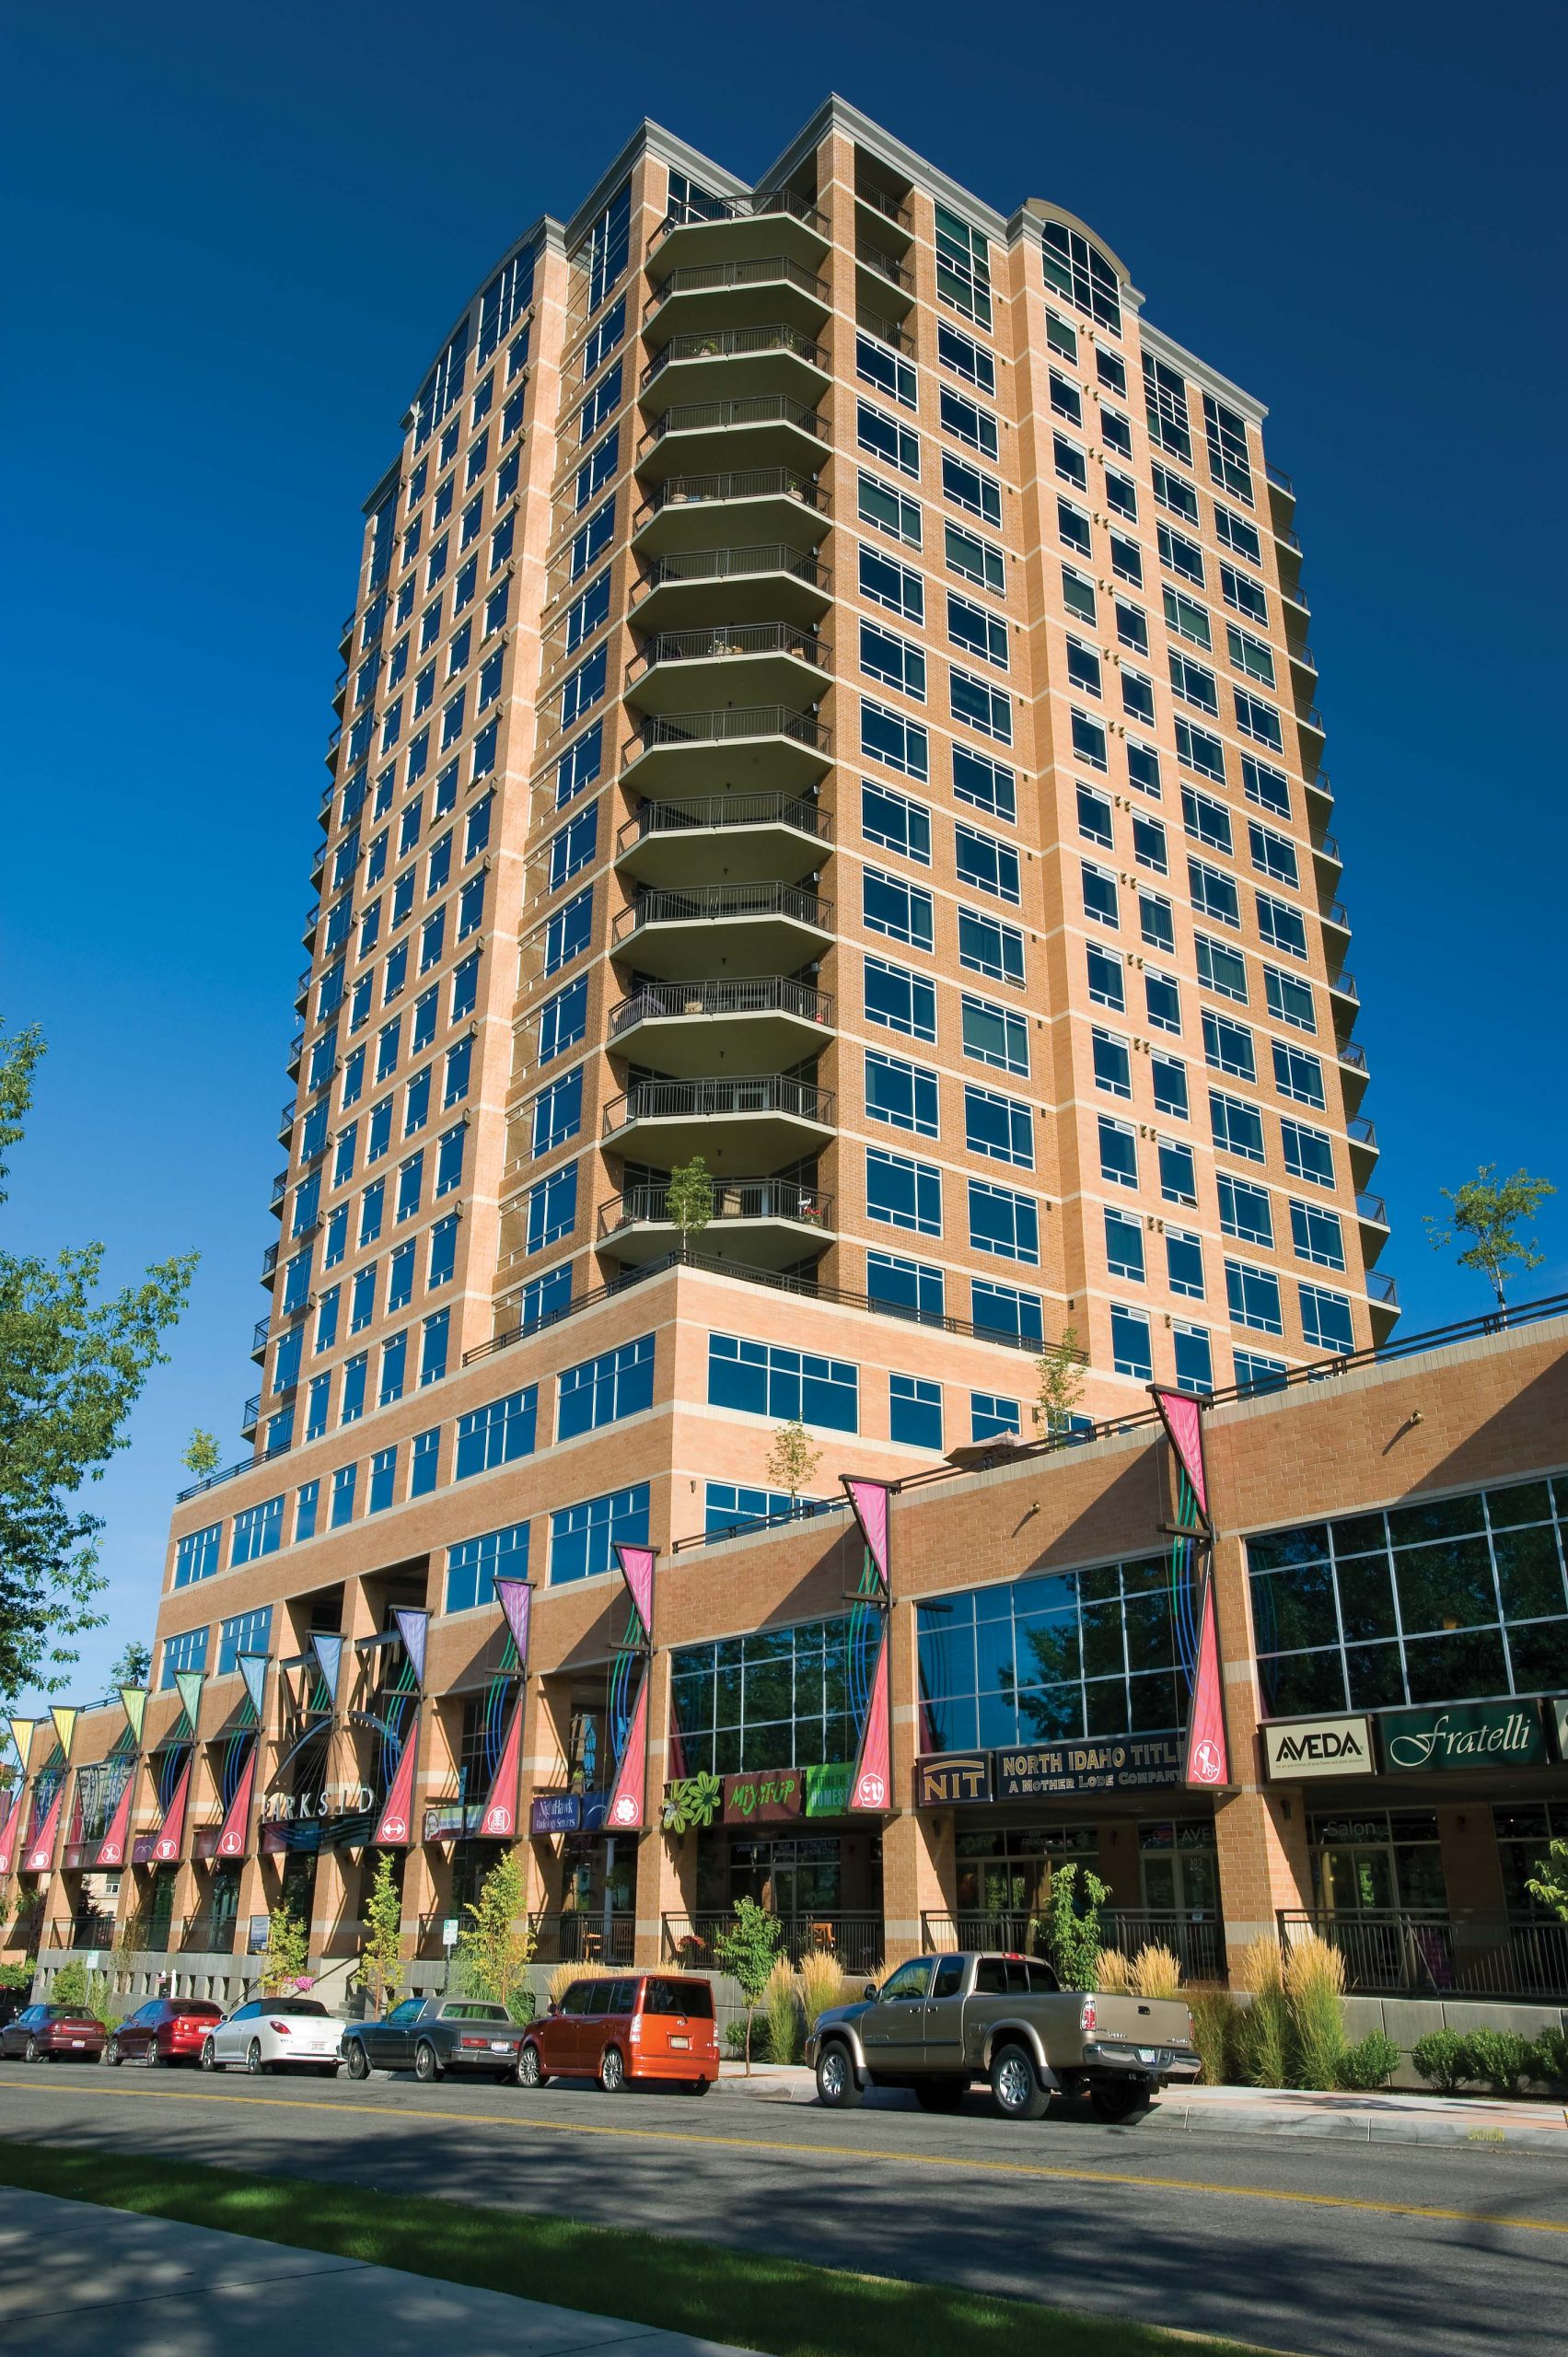 Parkside is a beautiful mixed-use high-rise in downtown Coeur d'Alene that features 53 luxury condominiums, office space, retail space, underground parking, open air raised plaza, an 18 hole putting green, fitness center, and numerous roof top terraces.